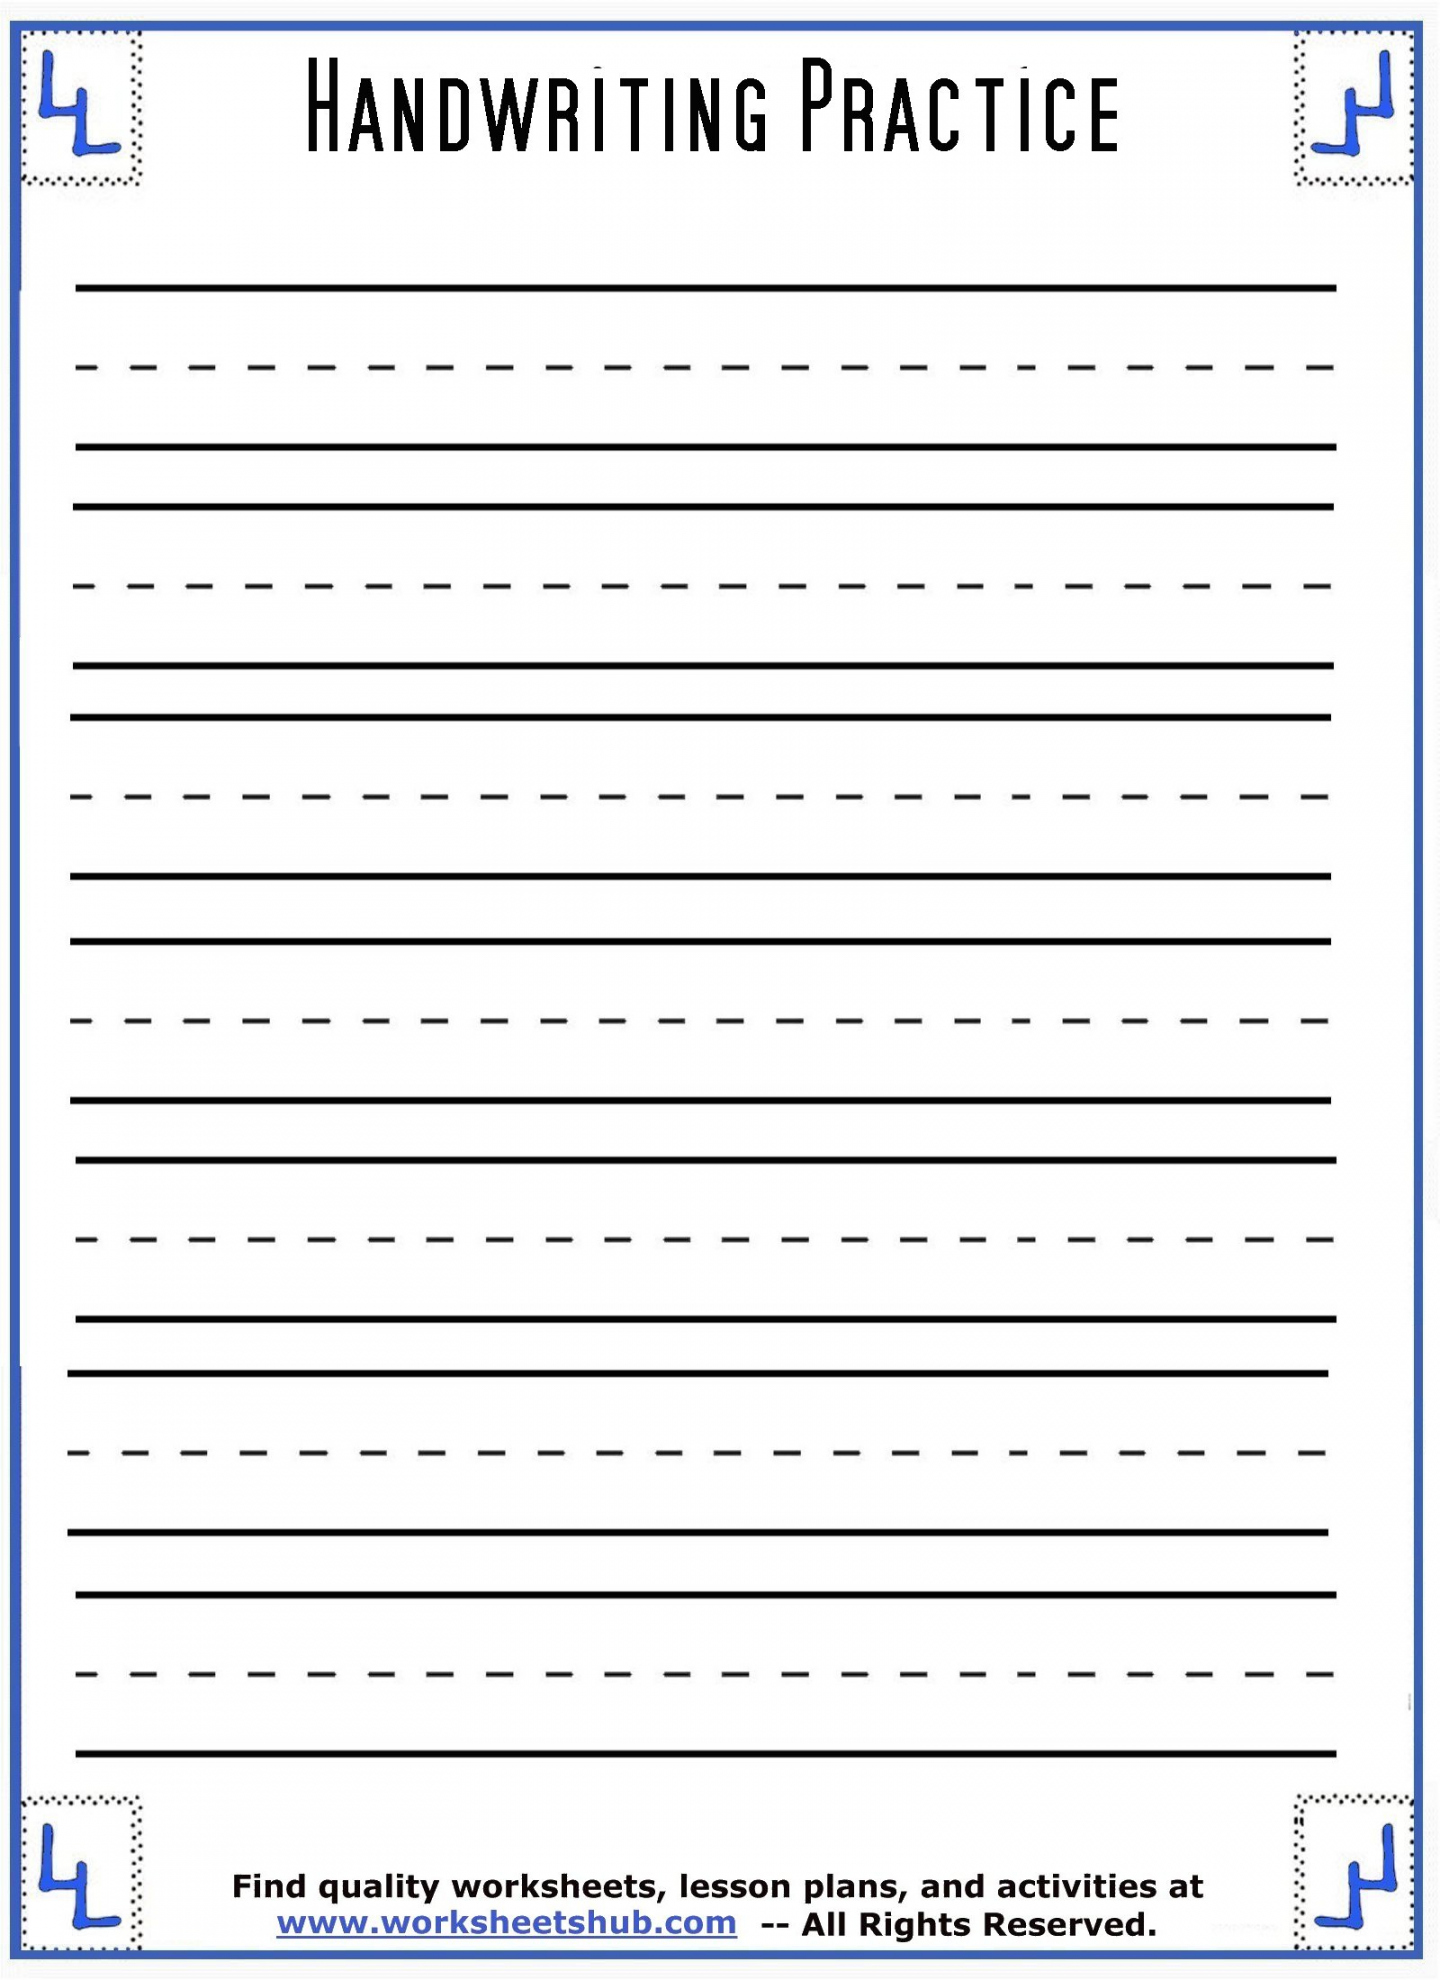 Handwriting Sheets:Printable -Lined Paper - FREE Printables - Handwriting Paper With Lines